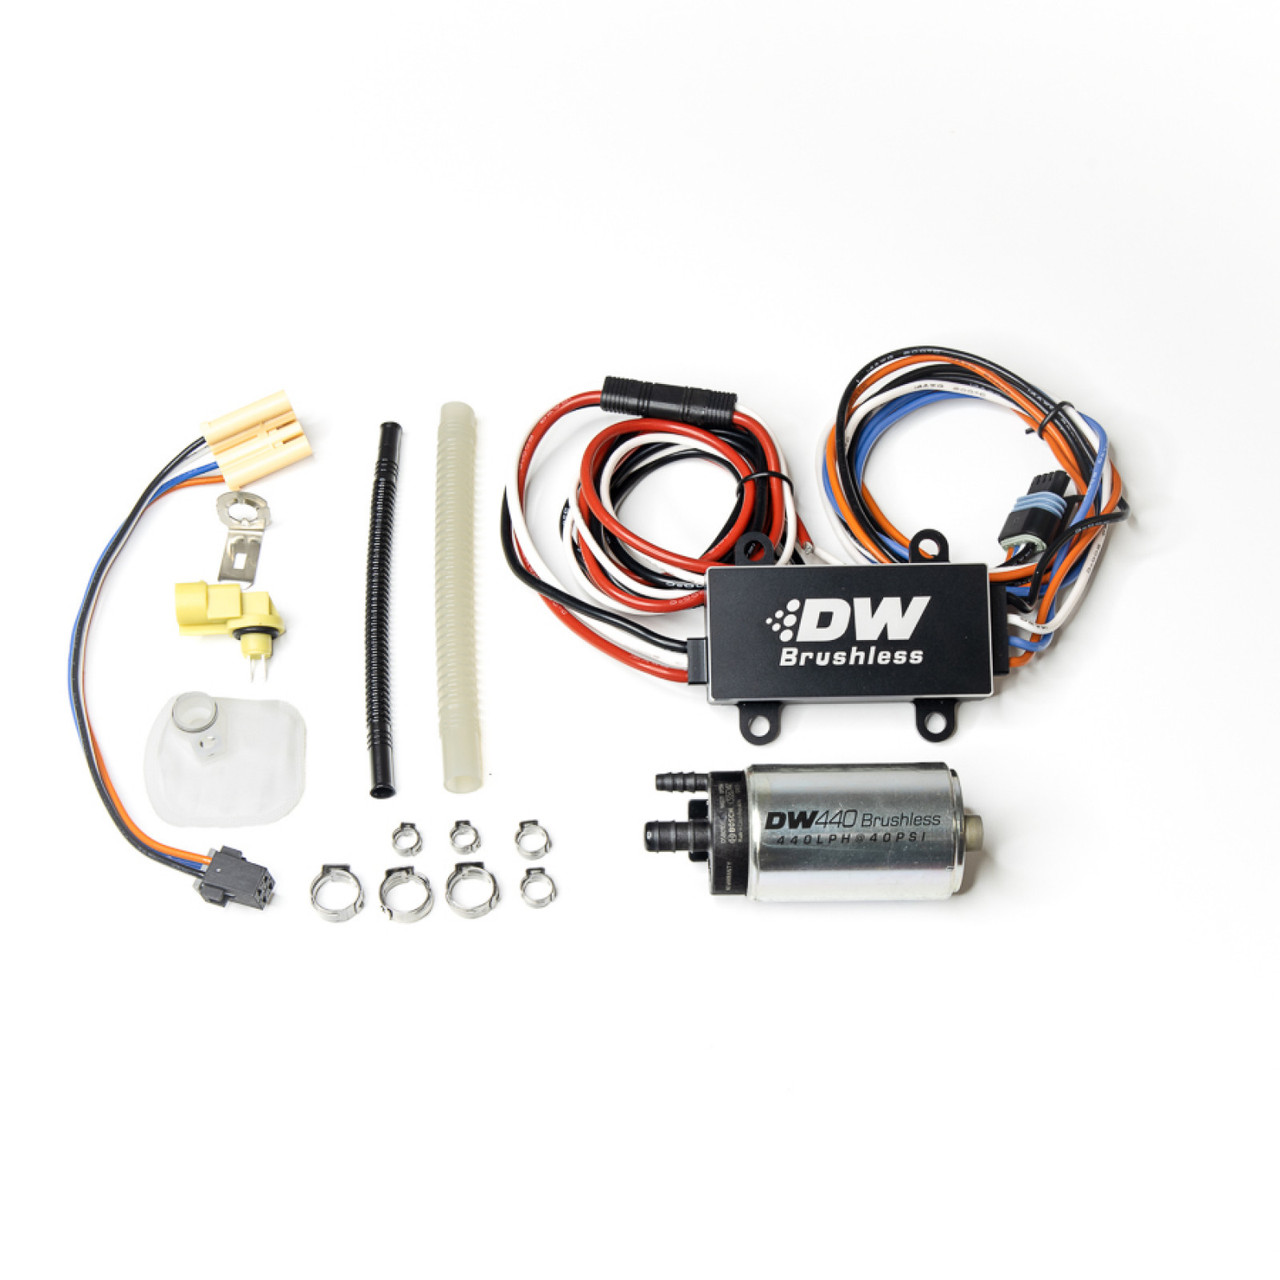 Deatschwerks 440lph In-Tank Brushless Fuel Pump with PWM Controller & 9-0906 Install Kit (DEW-9-442-C103-0906)